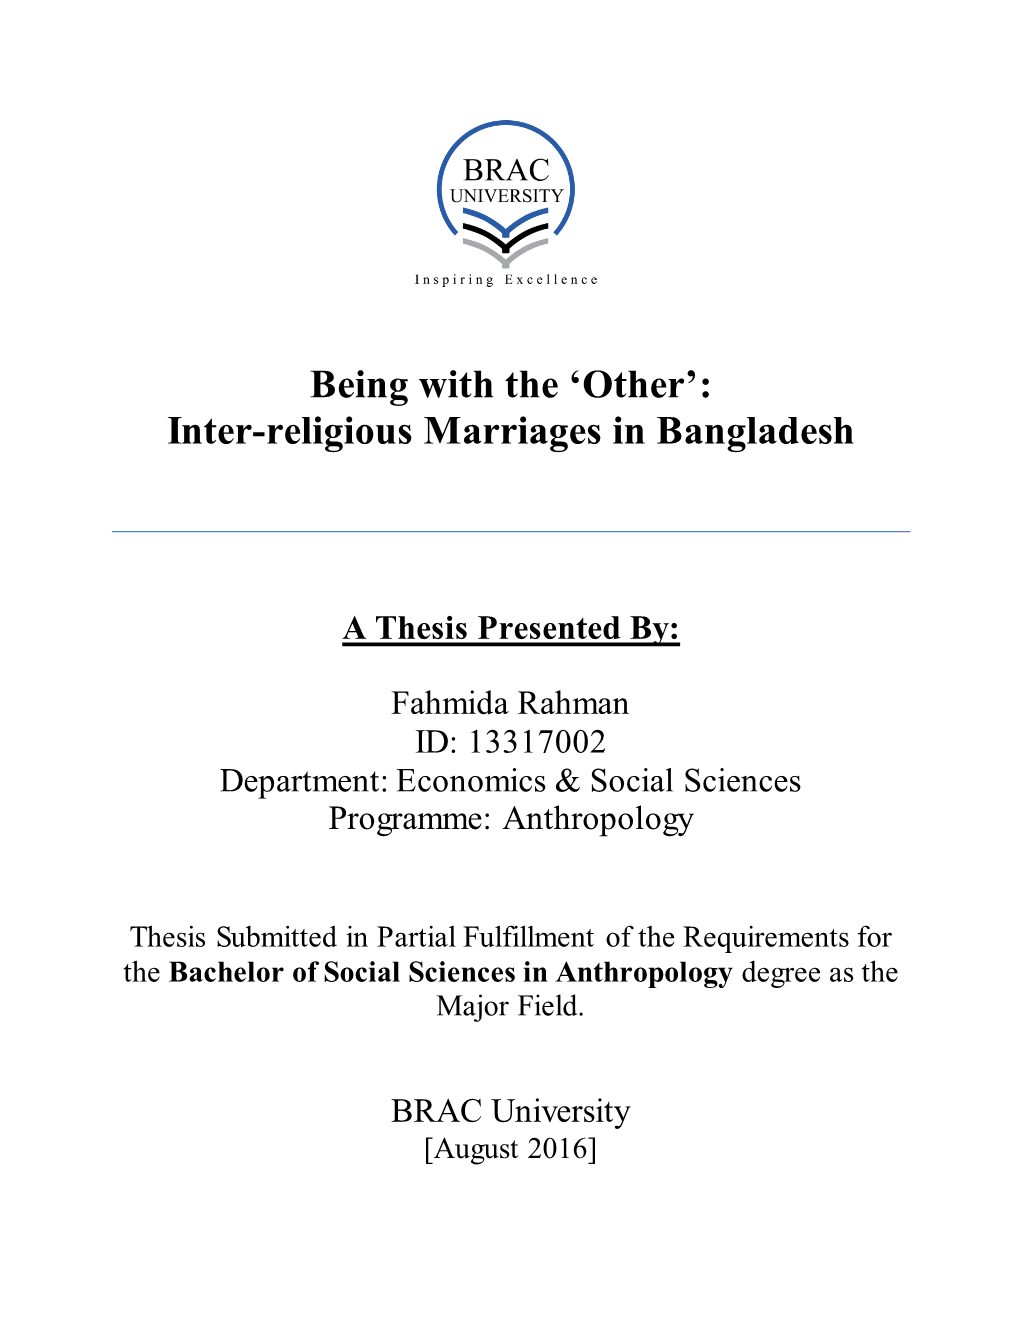 Inter-Religious Marriages in Bangladesh